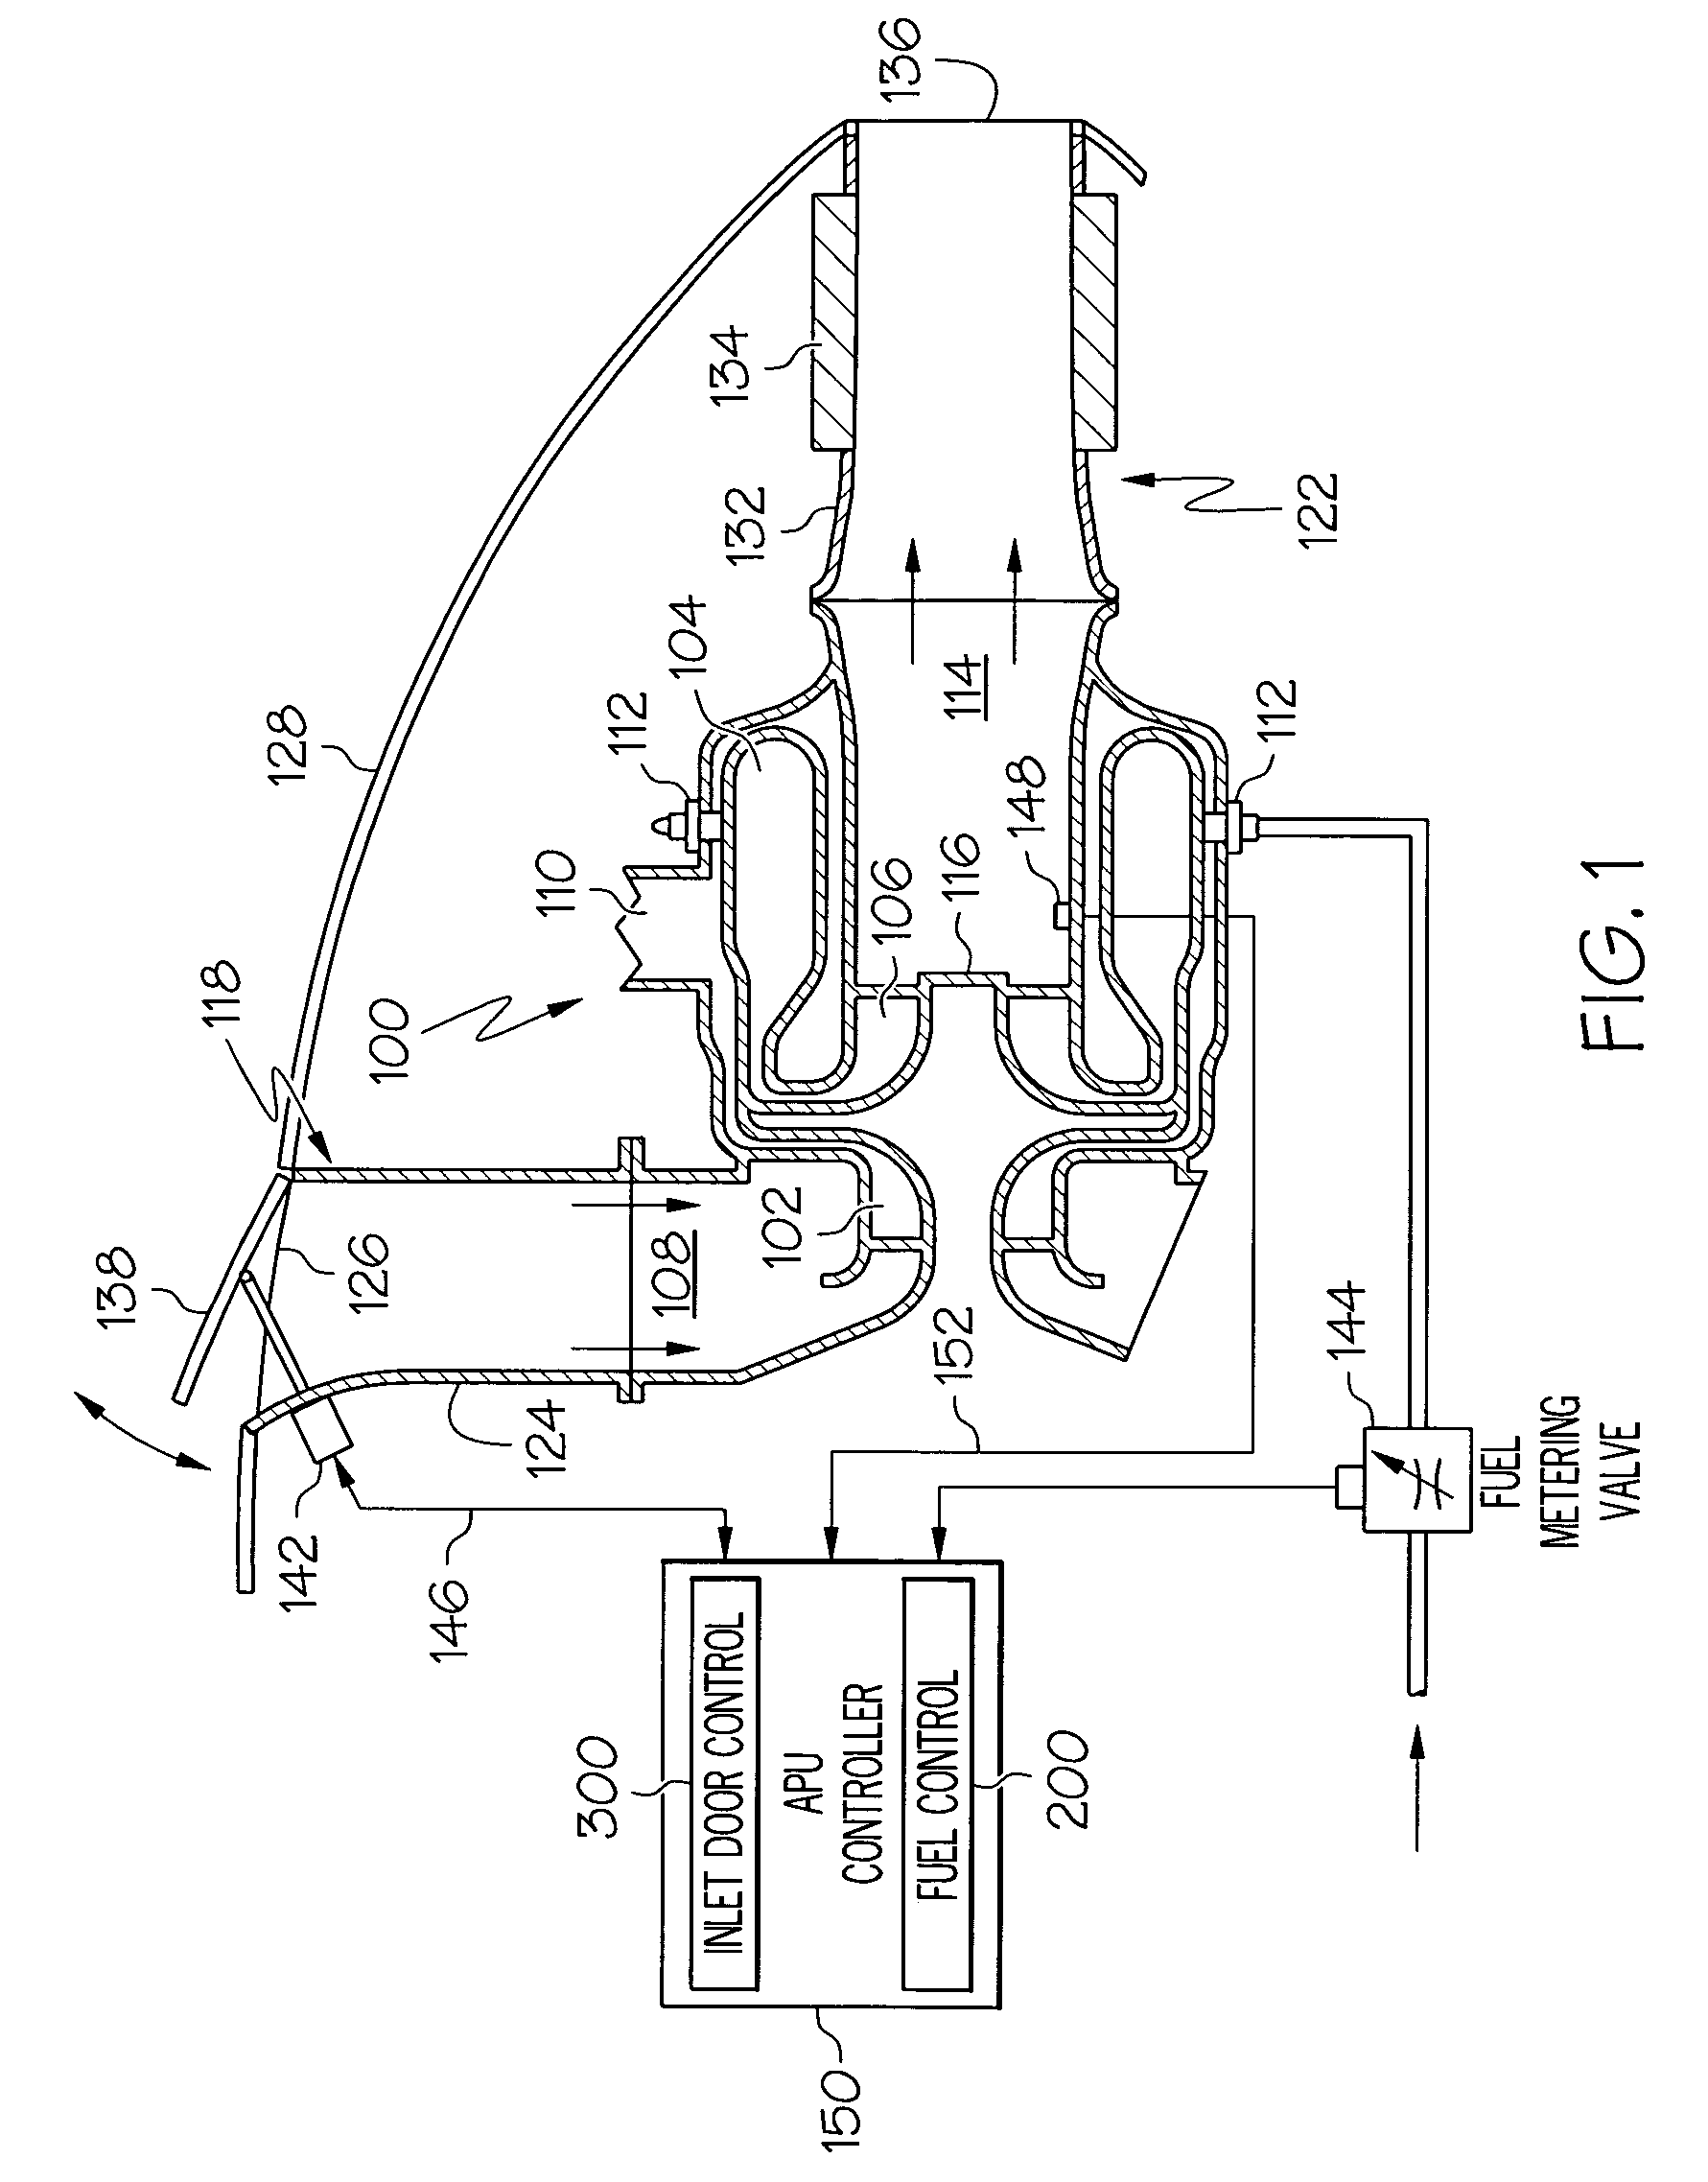 Auxiliary power unit inlet door position control system and method